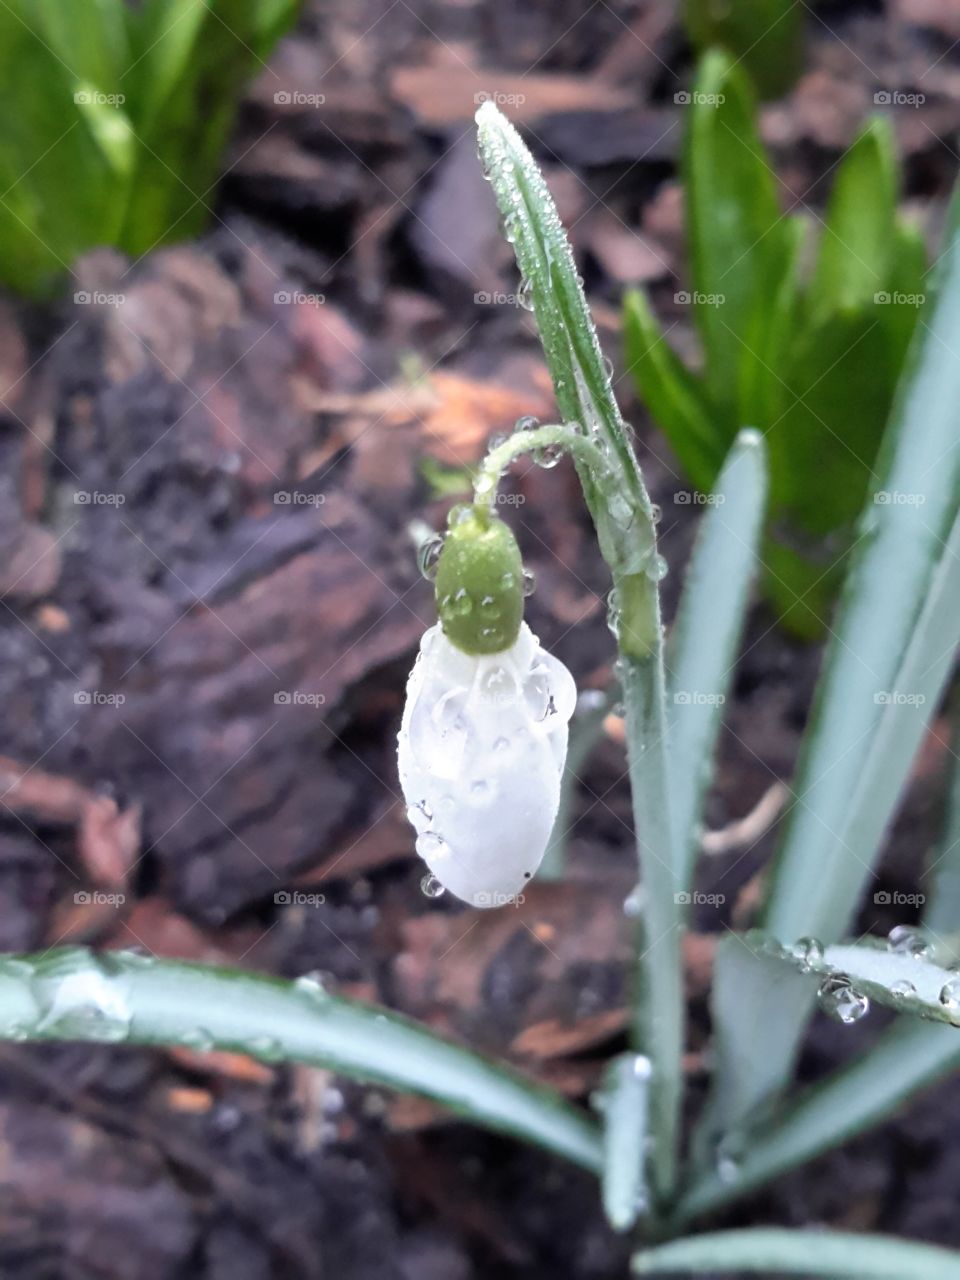 Spring is caming. Snowdrops in the raindrops. Zielona Góra, Poland.